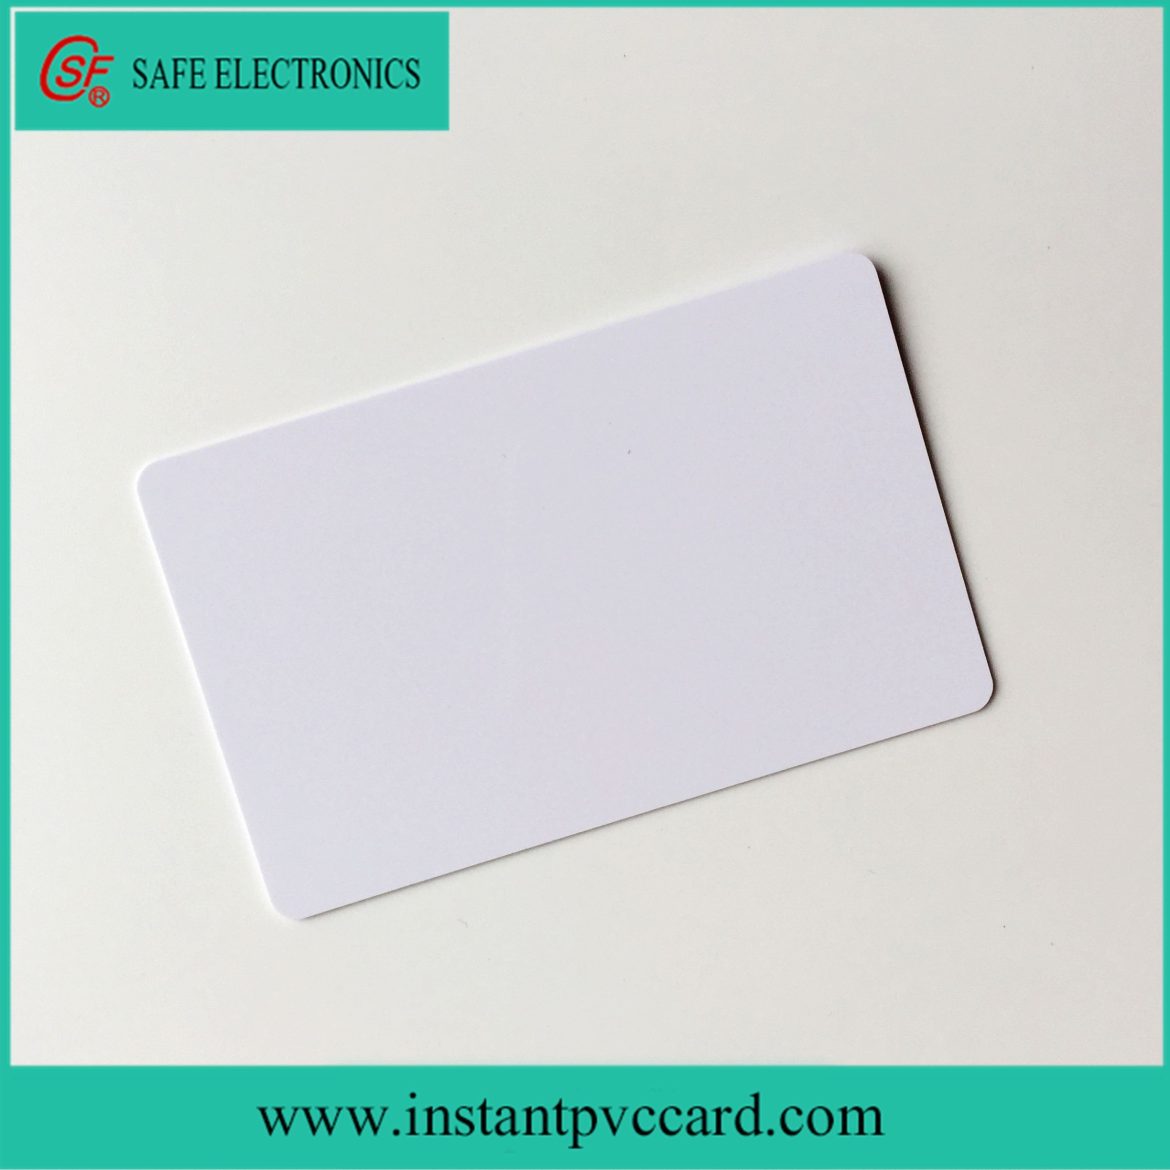 What Is a PVC Card?